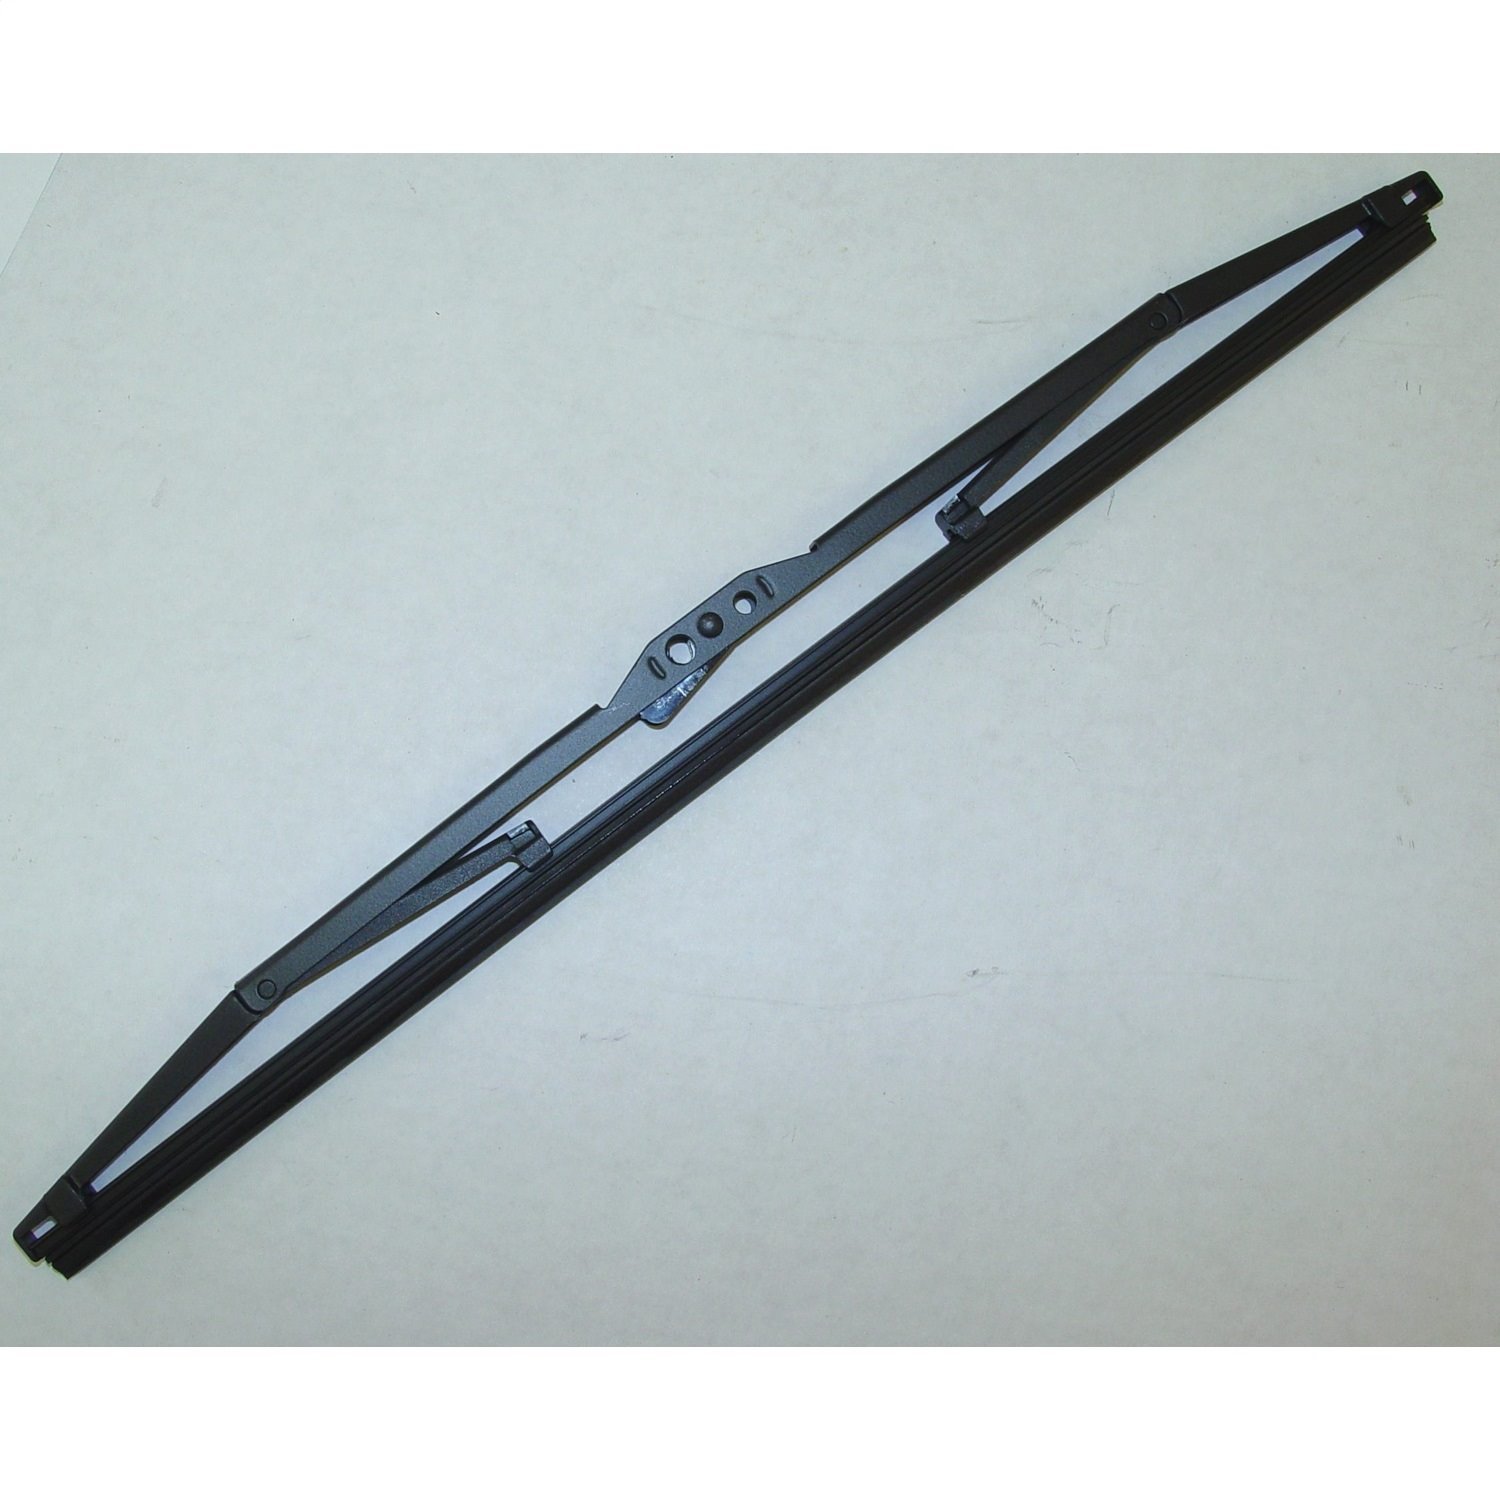 This 16 inch rear wiper blade from Omix-ADA fits the rear hardtop window on 87-95 Jeep Wrangler YJ .